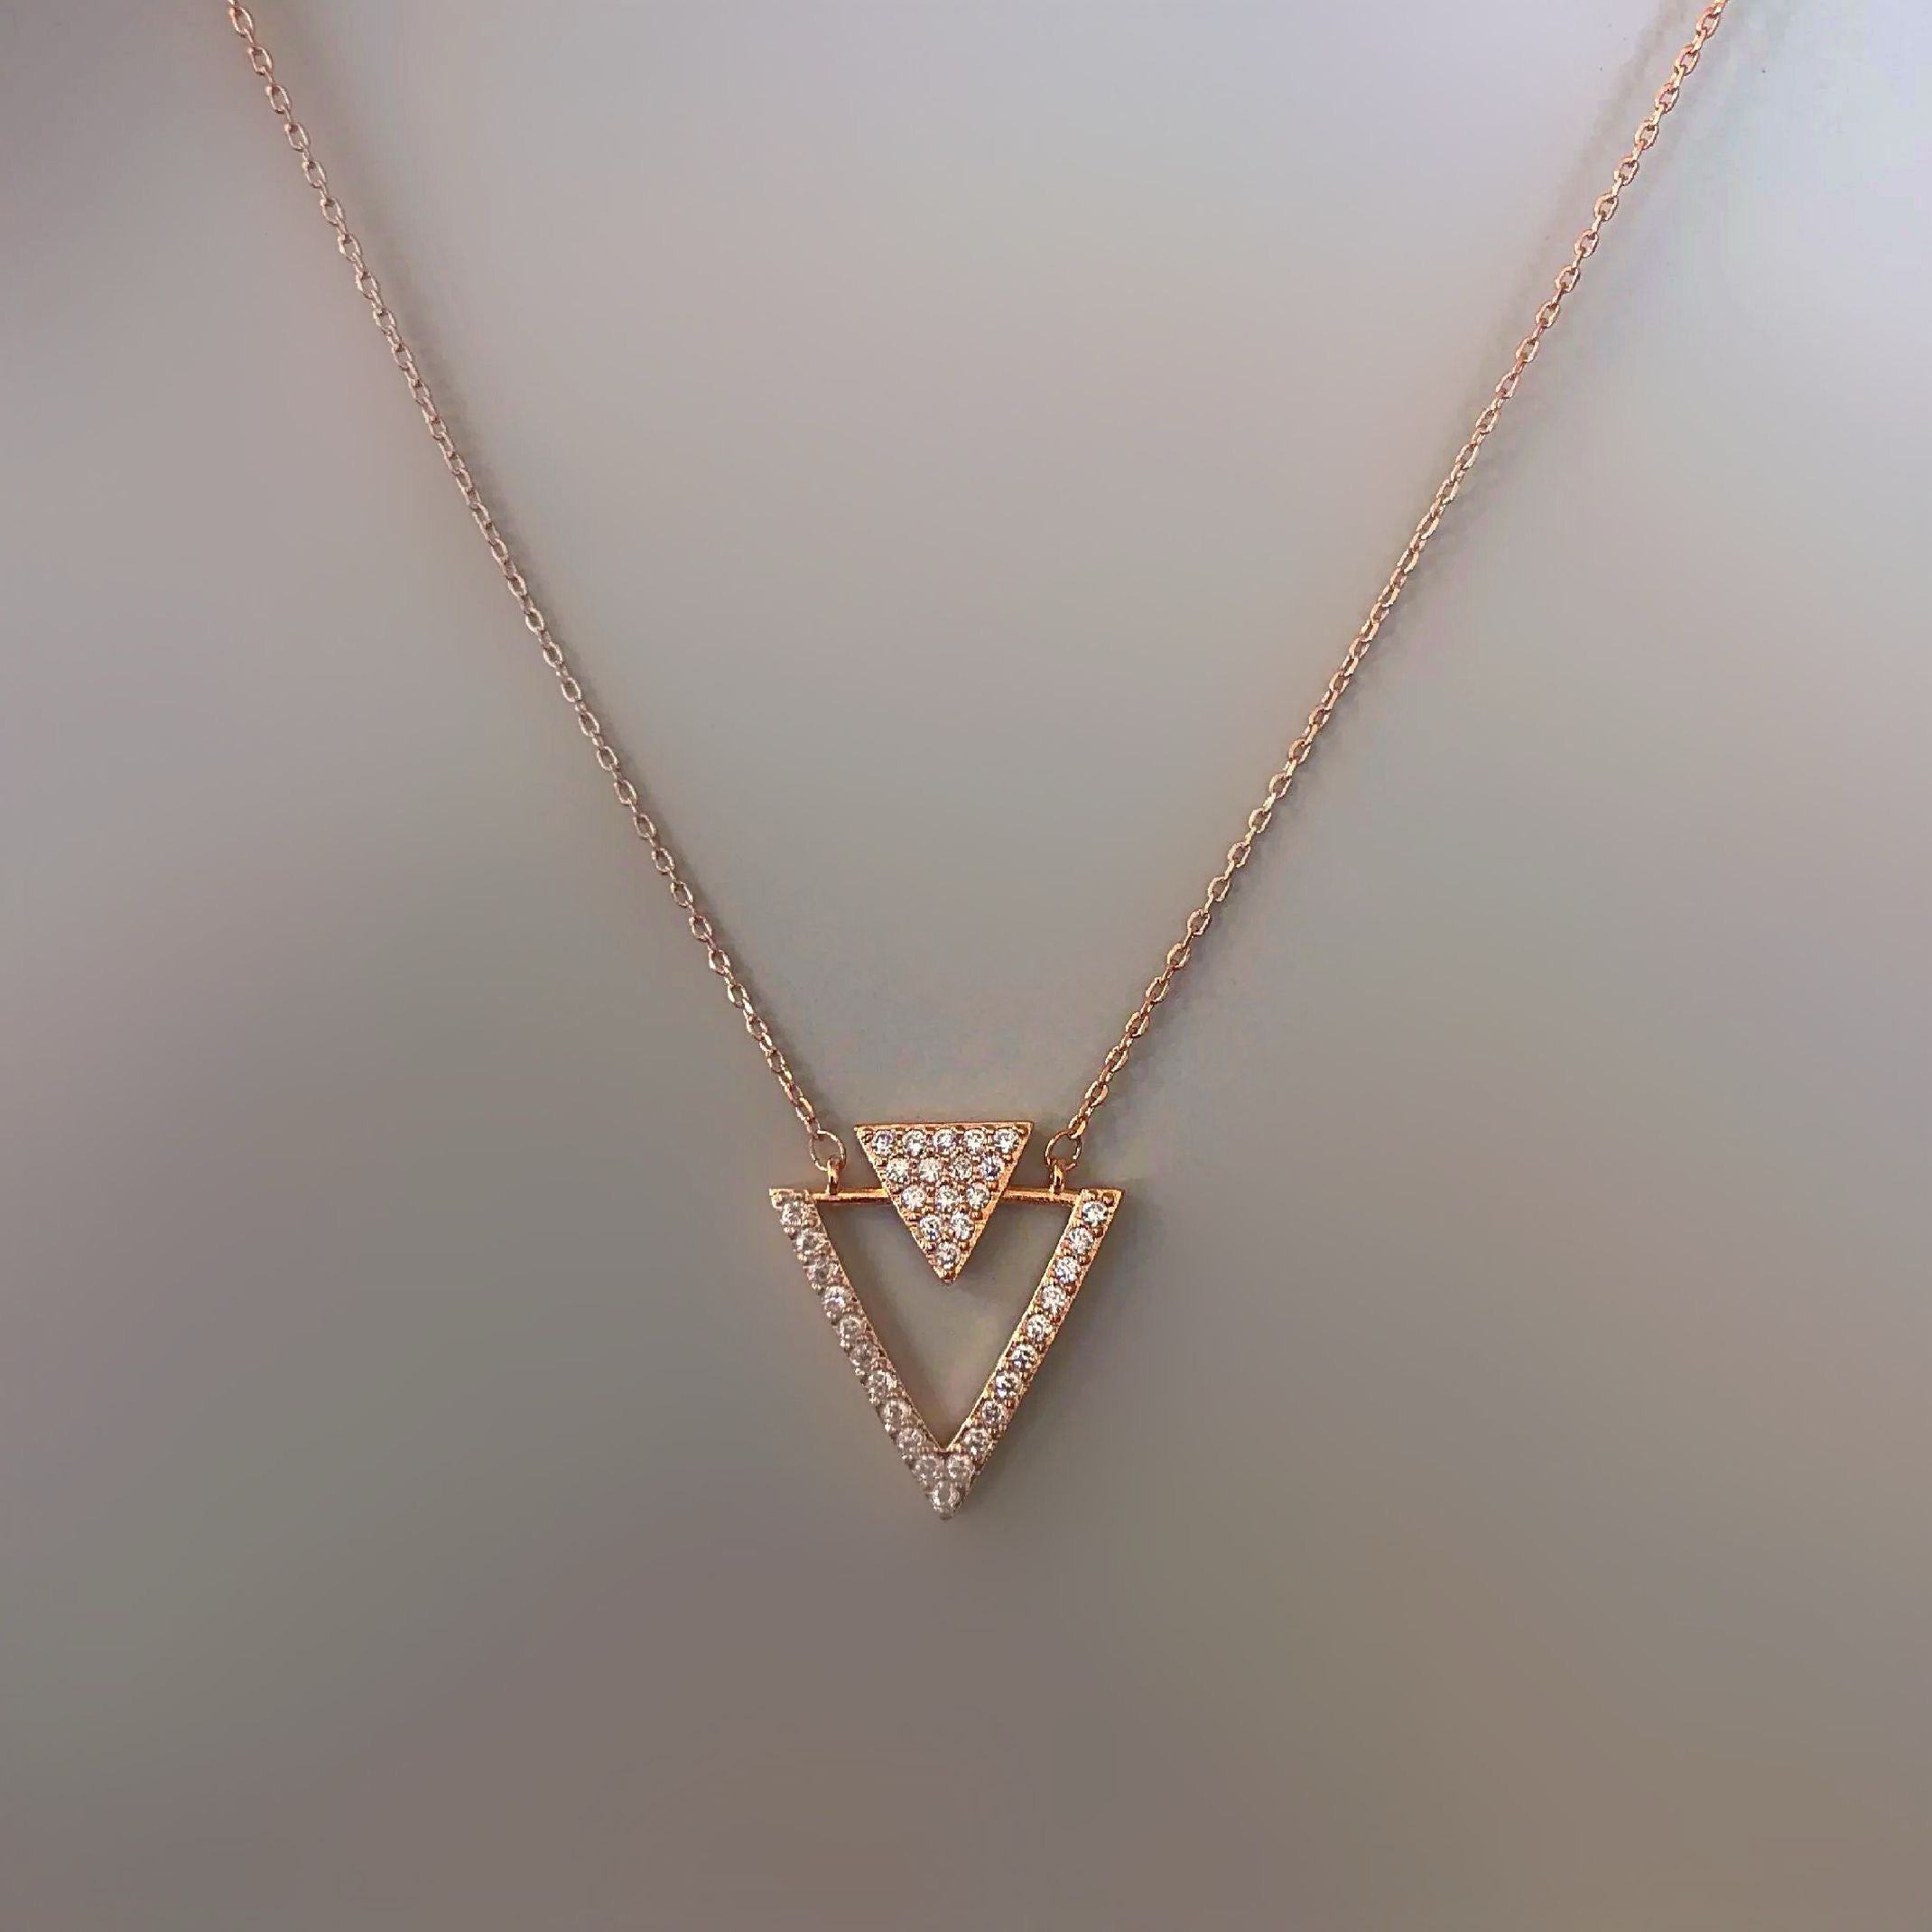 Rose gold sparkly triangle chain